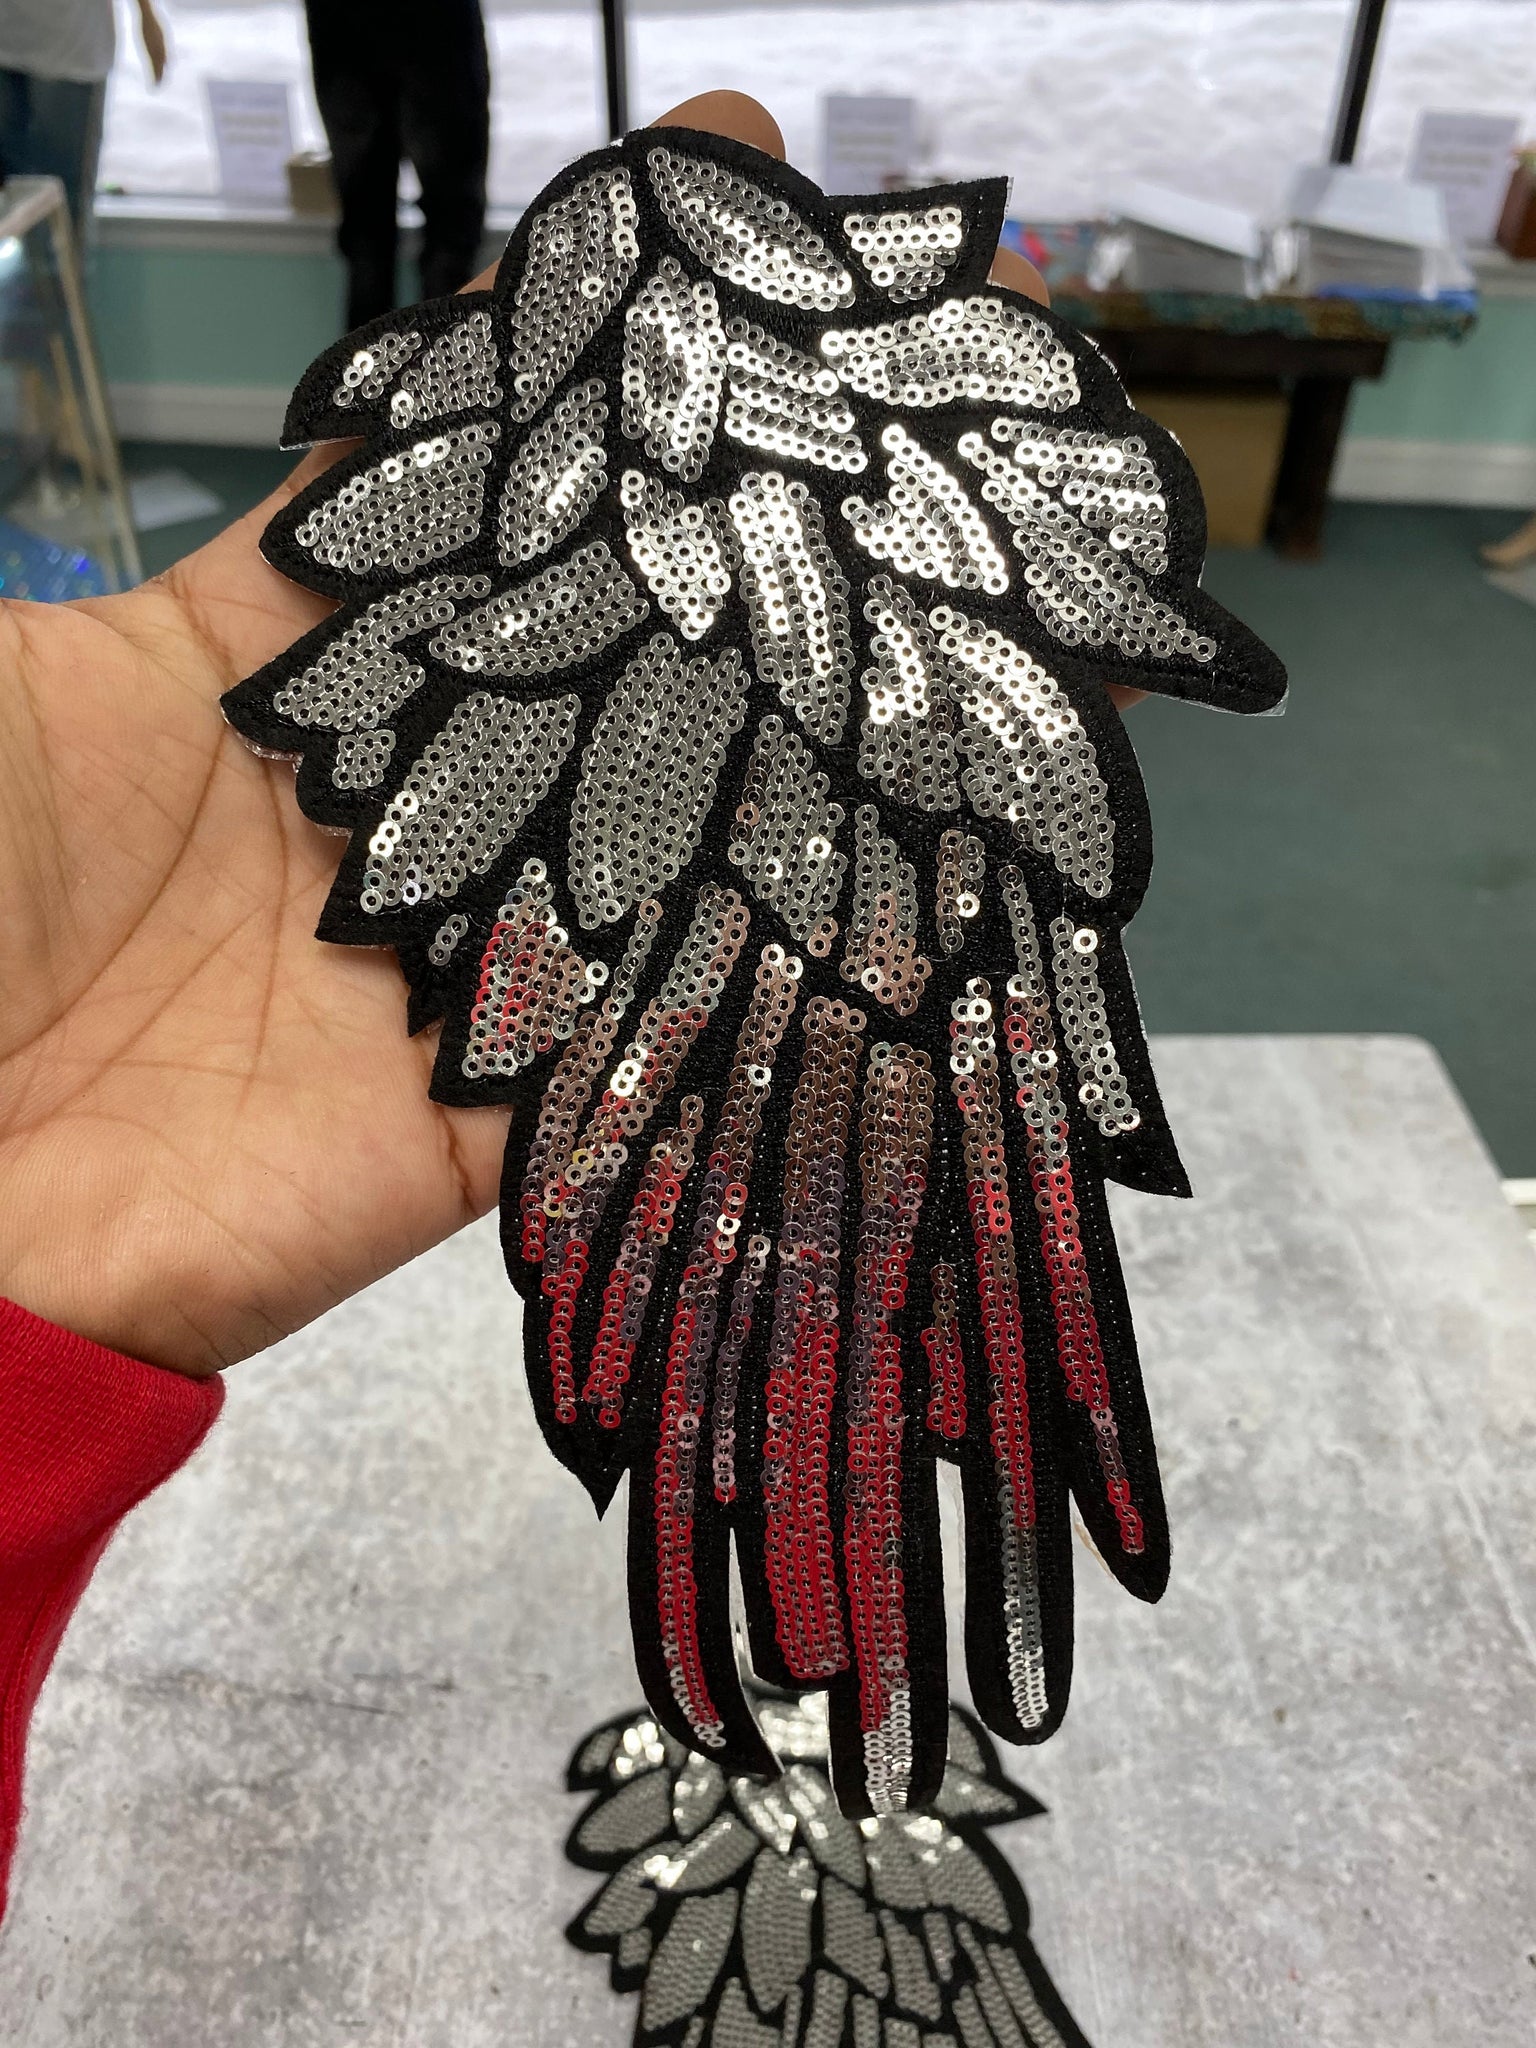 New Sequins, Silver Angel Wings Patch (iron-on) Size 10"x5.5", LARGE Bling Patch for Denim Jacket, Shirts, Hoodies